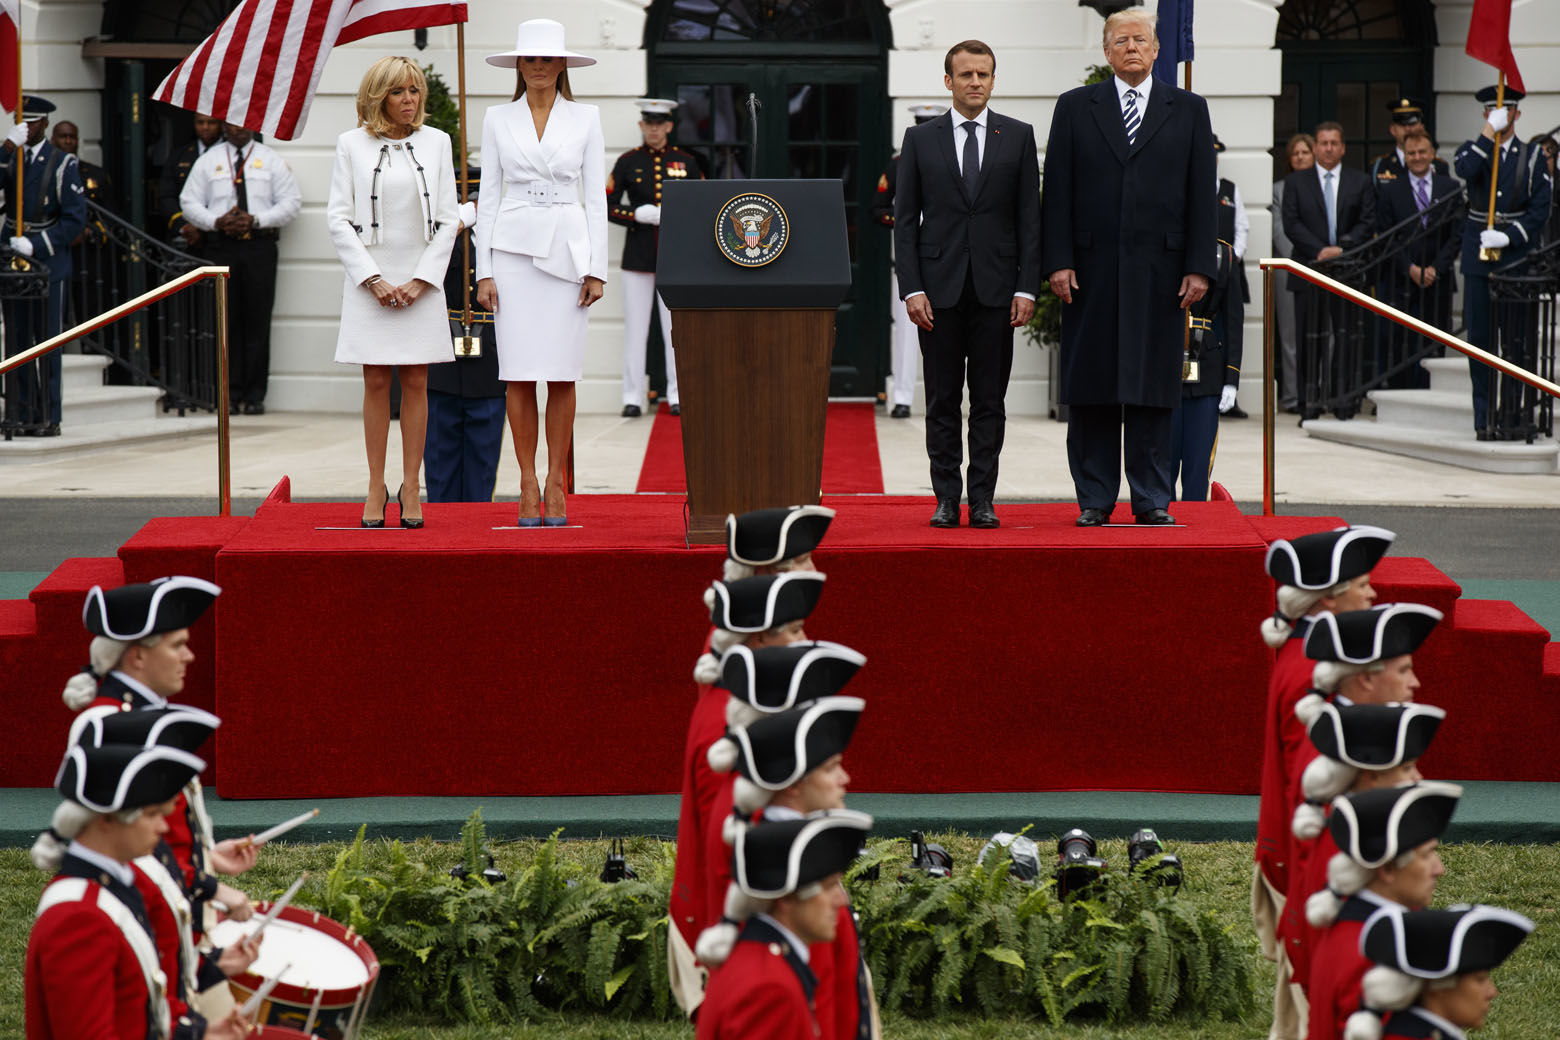 Brigitte Macron, first lady Melania Trump, French President Emmanuel Macron, and President Donald Trump look on during a State Arrival Ceremony on the South Lawn of the White House, Tuesday, April 24, 2018, in Washington. (AP Photo/Evan Vucci)